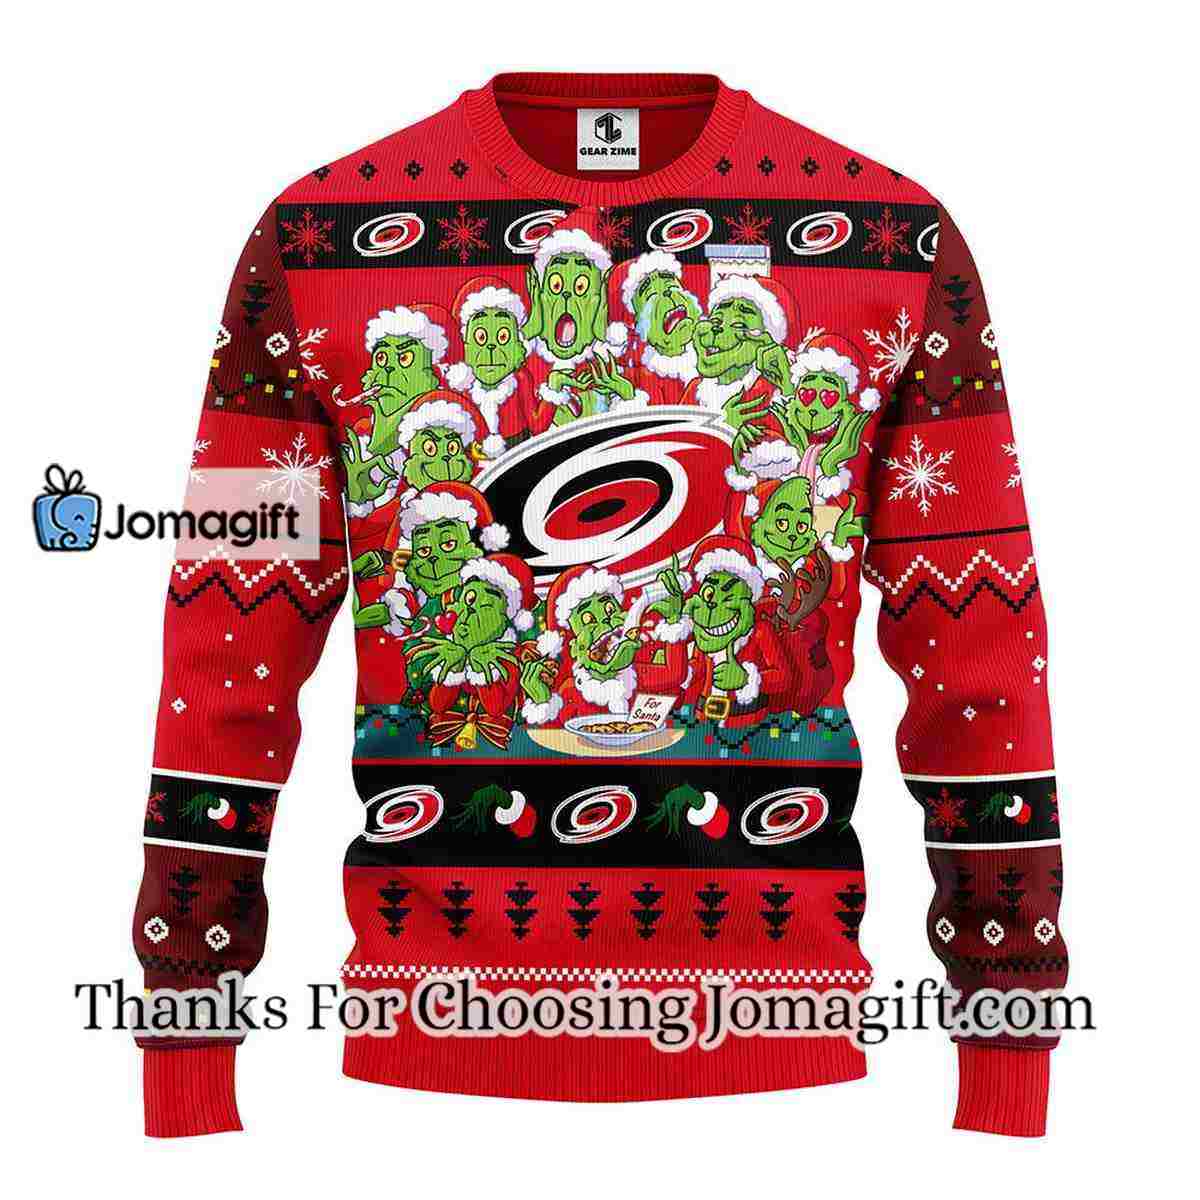 Carolina Hurricanes 12 Grinch Xmas Day Christmas Ugly Sweater Christmas  Gift For Fans Party Hoiliday Gift